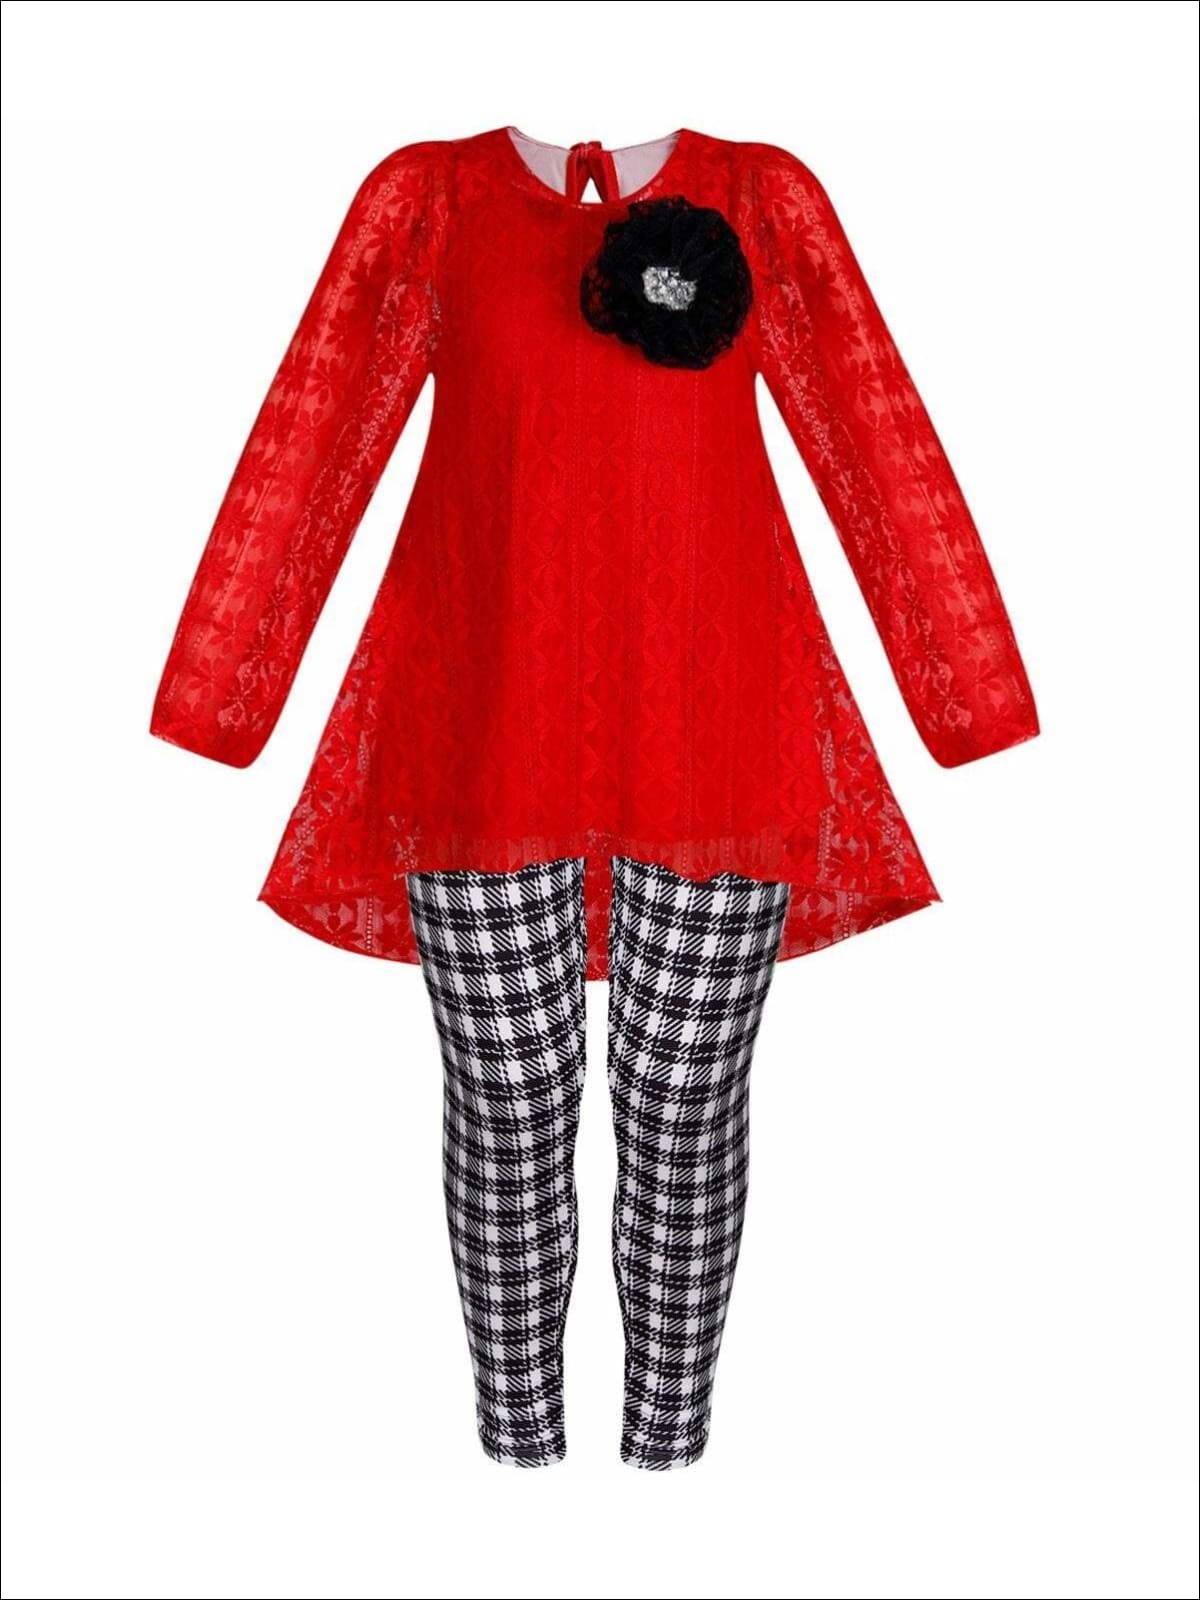 Girls Red Lace Long Sleeve Hi-Lo Tunic & Plaid Leggings Set - Red / 2T/3T - Girls Fall Casual Set